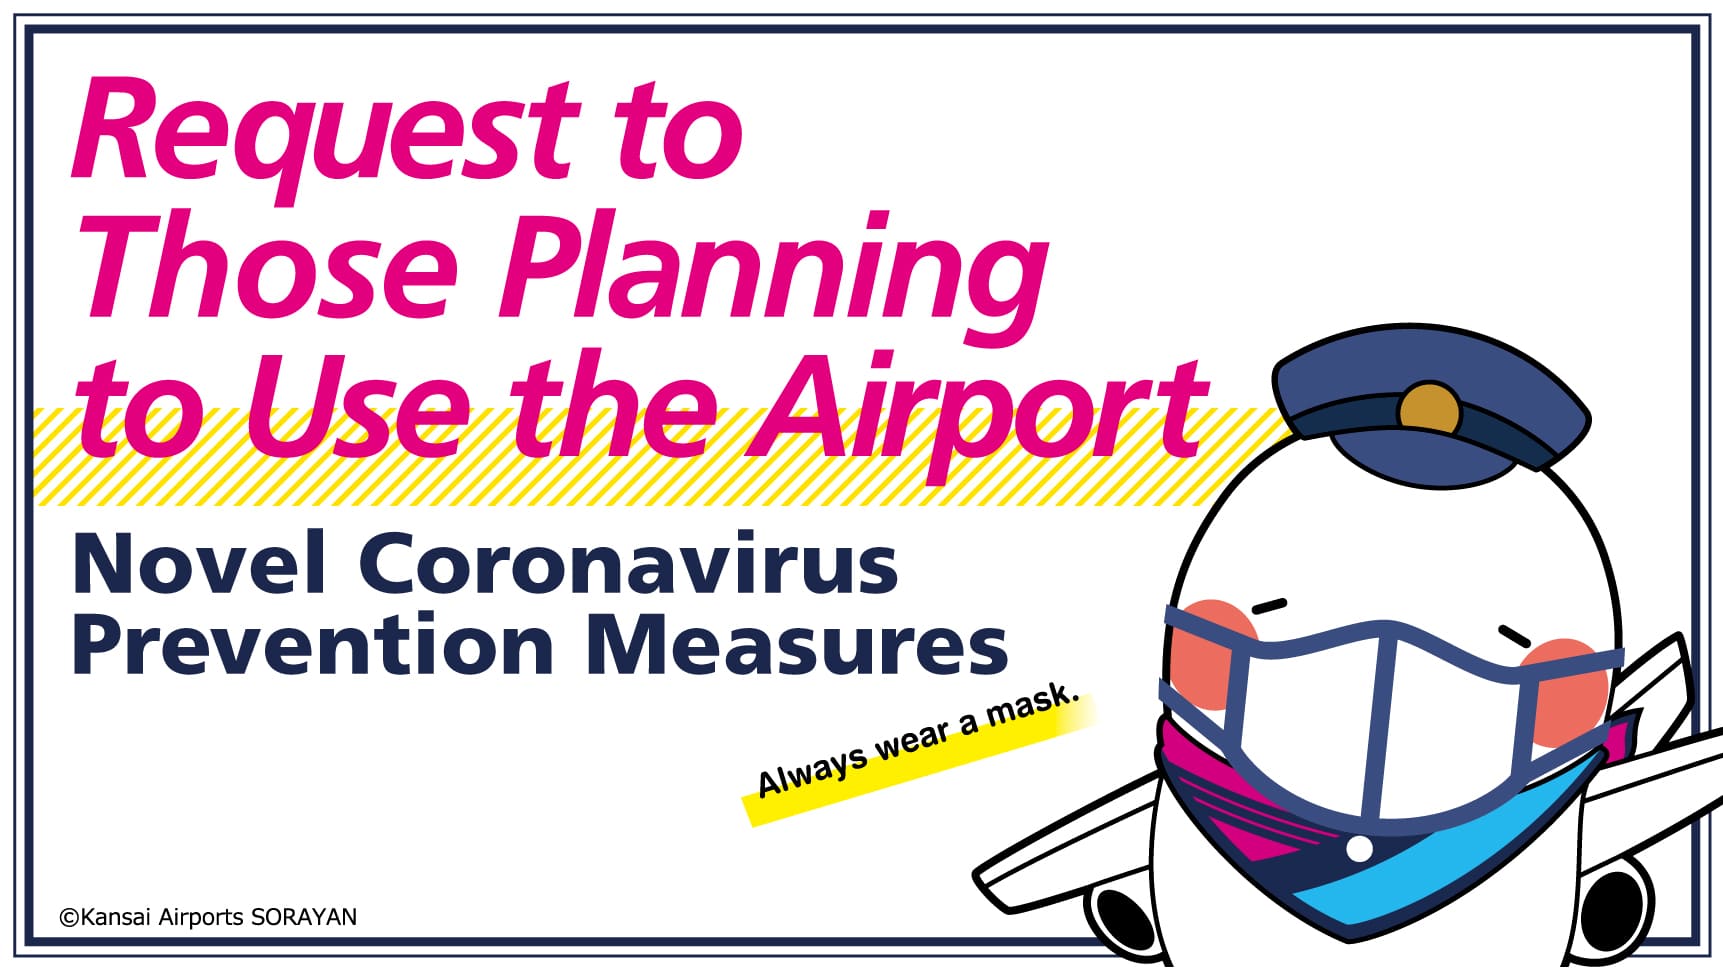 Airport Initiatives and a Request to Visitors to Prevent the Spread of the Novel Coronavirus